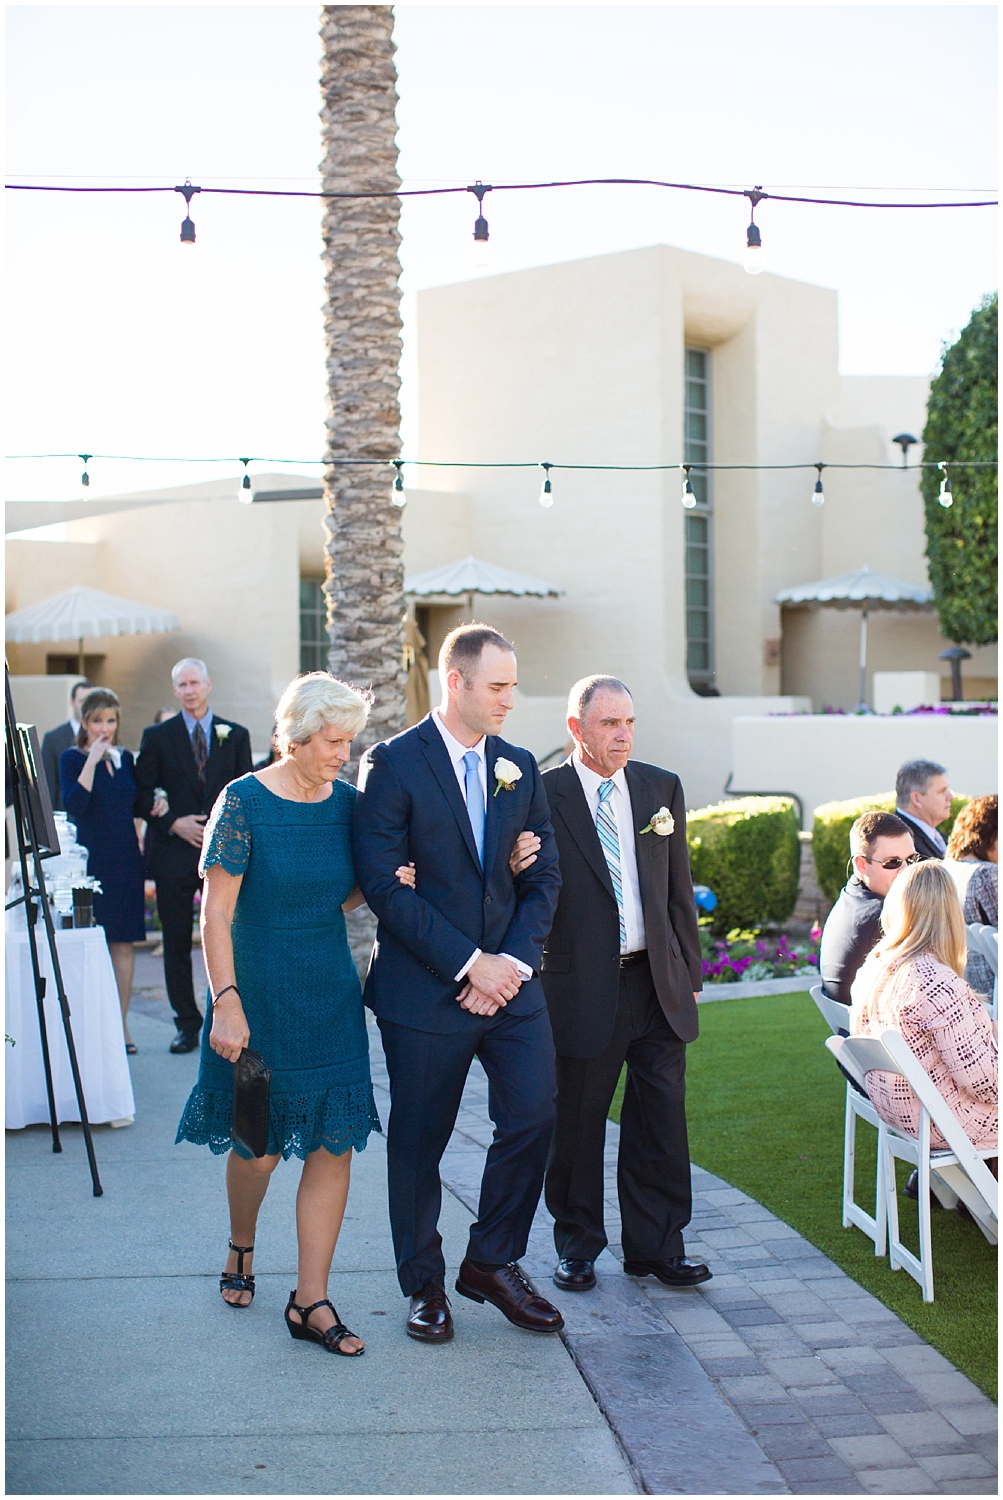 groom walking down aisle with parents at wedding ceremony